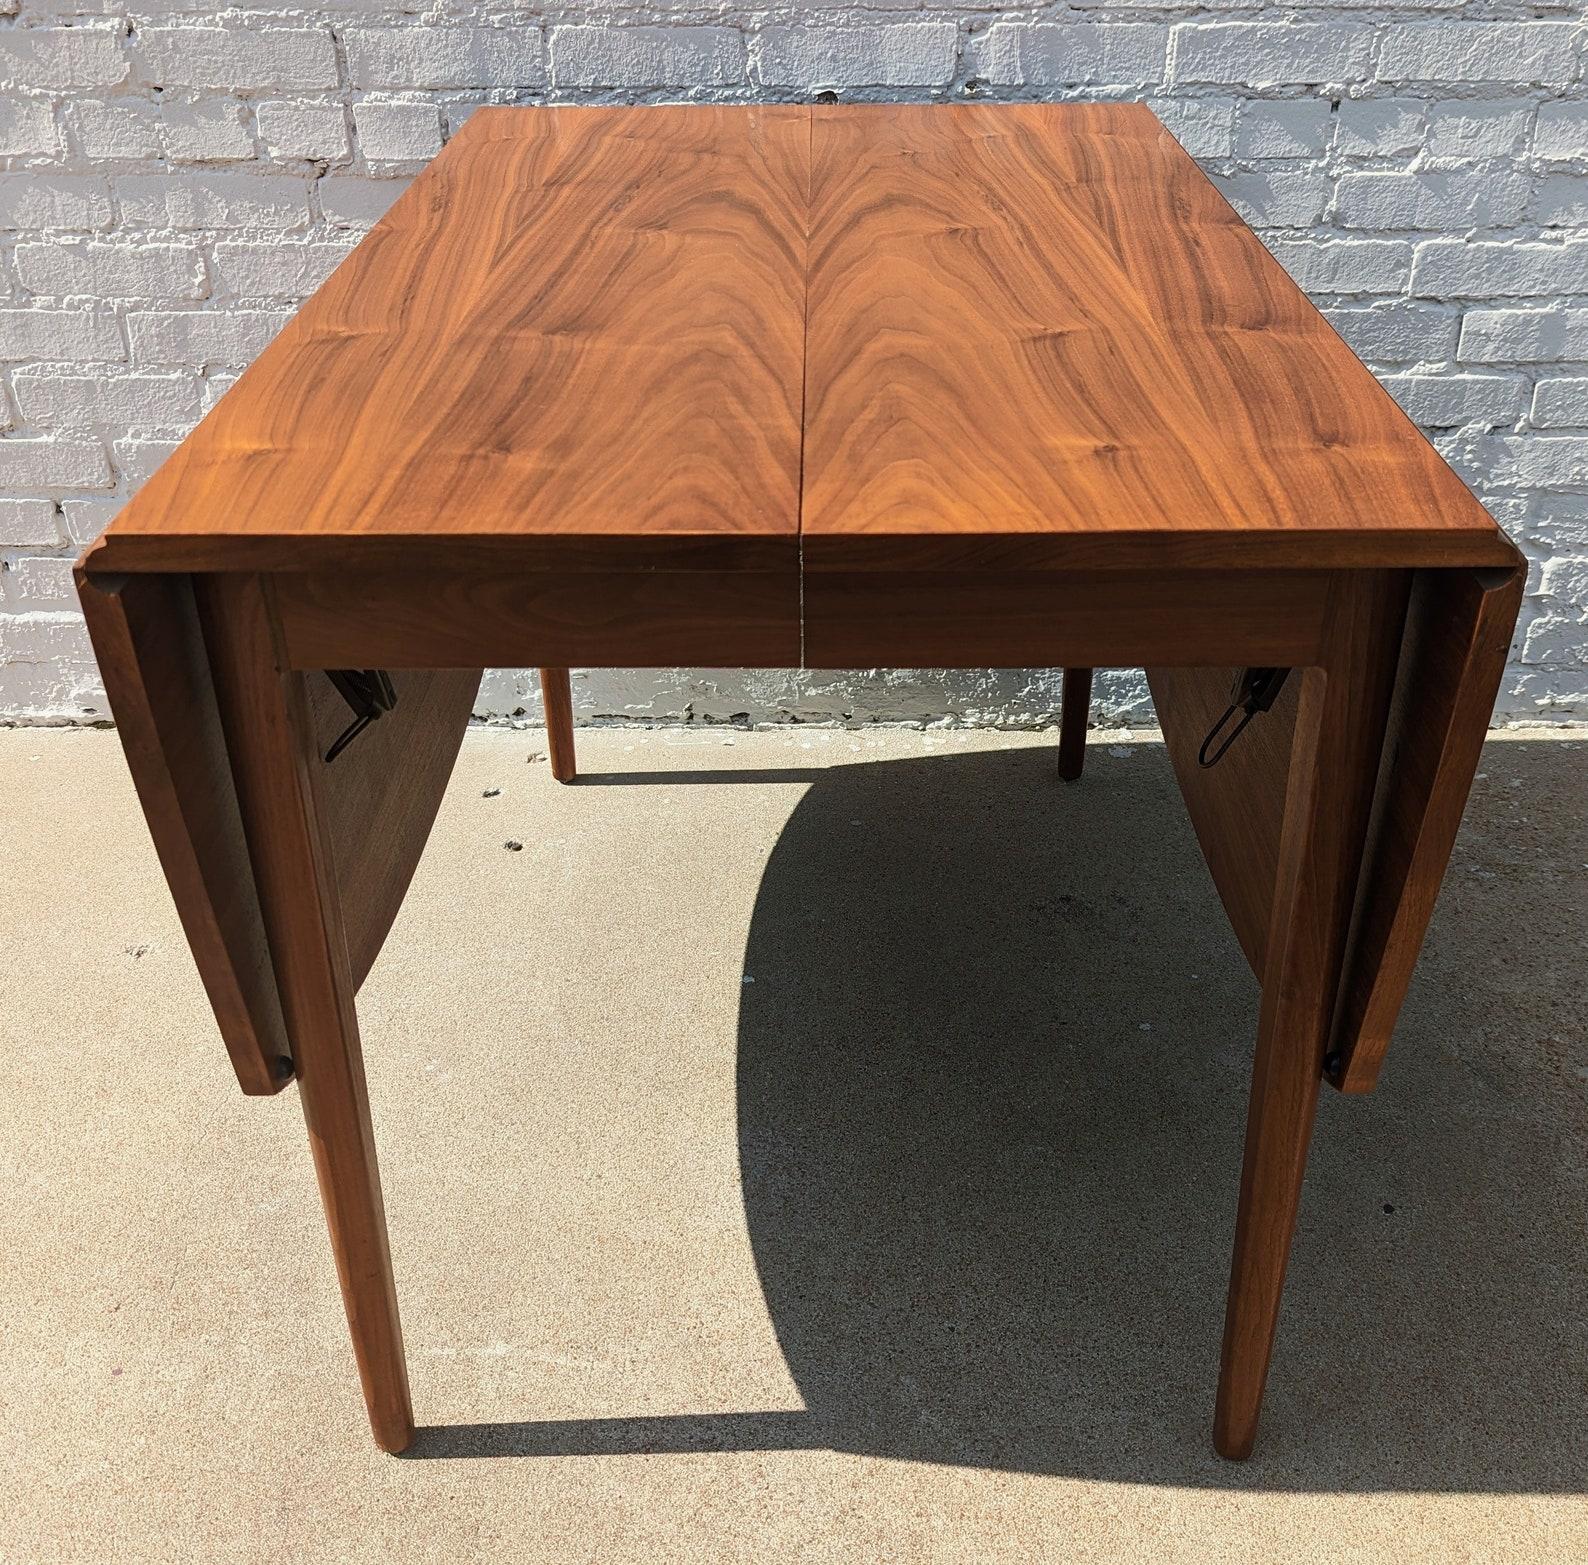 Mid Century Modern Drexel Declaration Dining Table by Kip Stewart

Above average vintage condition and structurally sound. Has some expected slight finish wear and scratching. Has a couple small dings and discolorations on top and edges. Has a